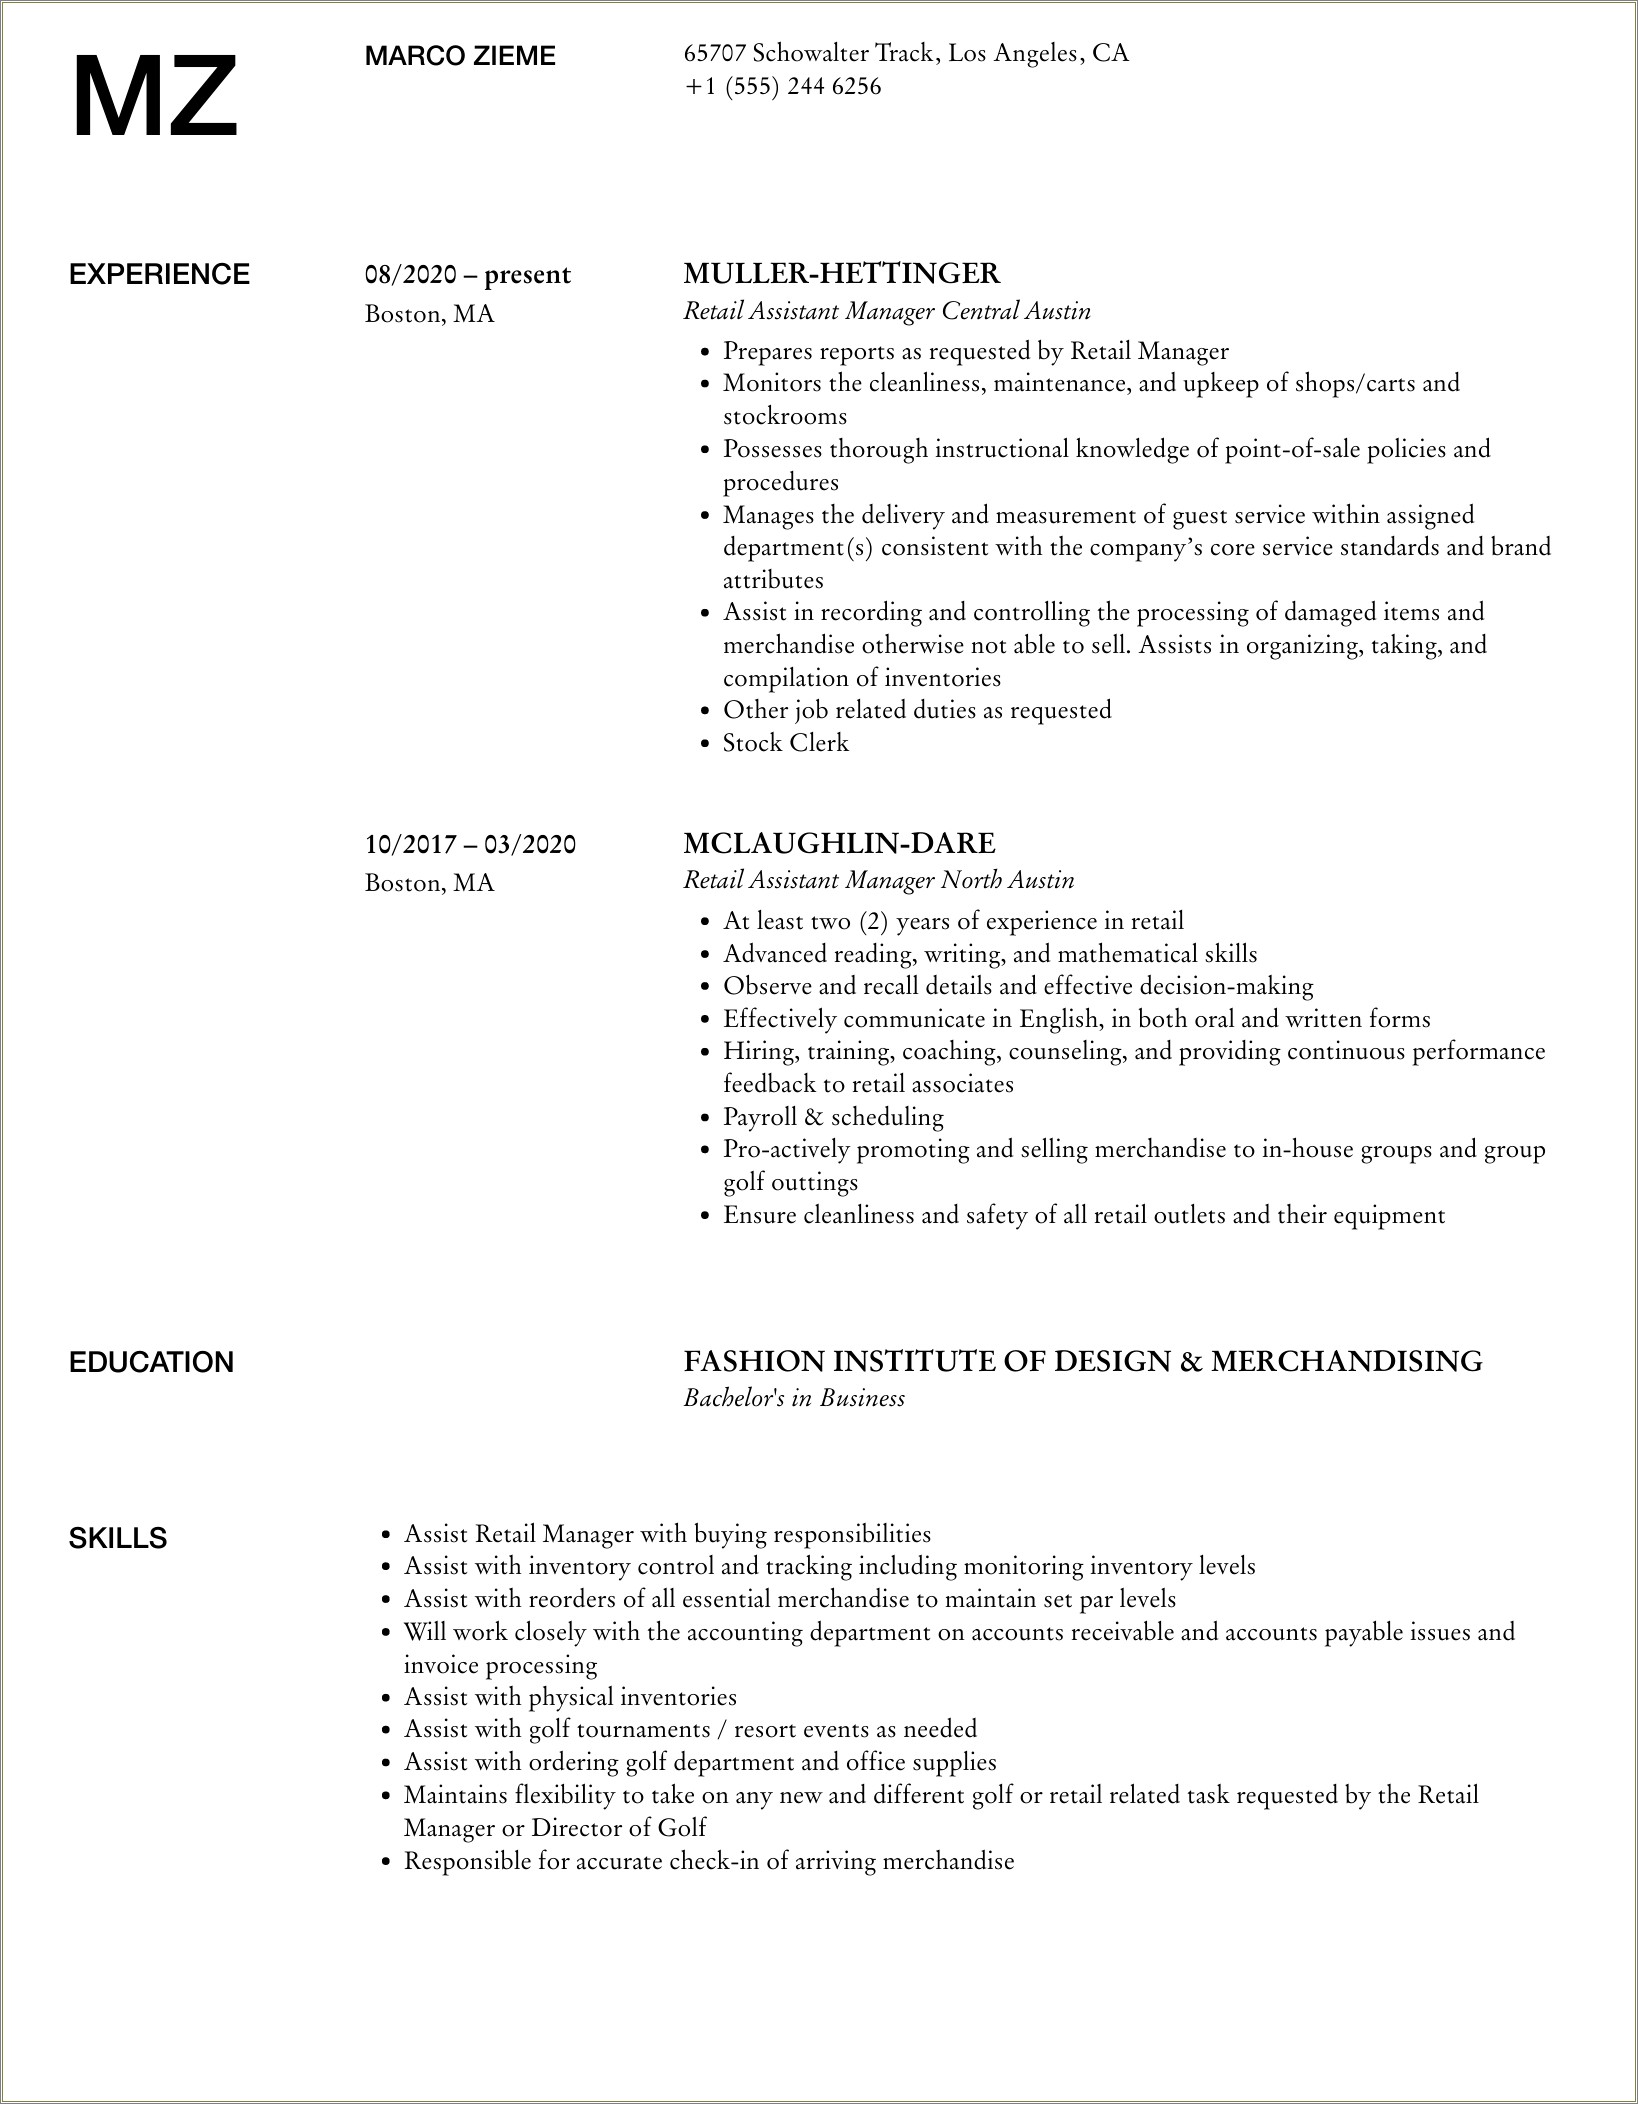 Retail Assistant Manager Duties For Resume